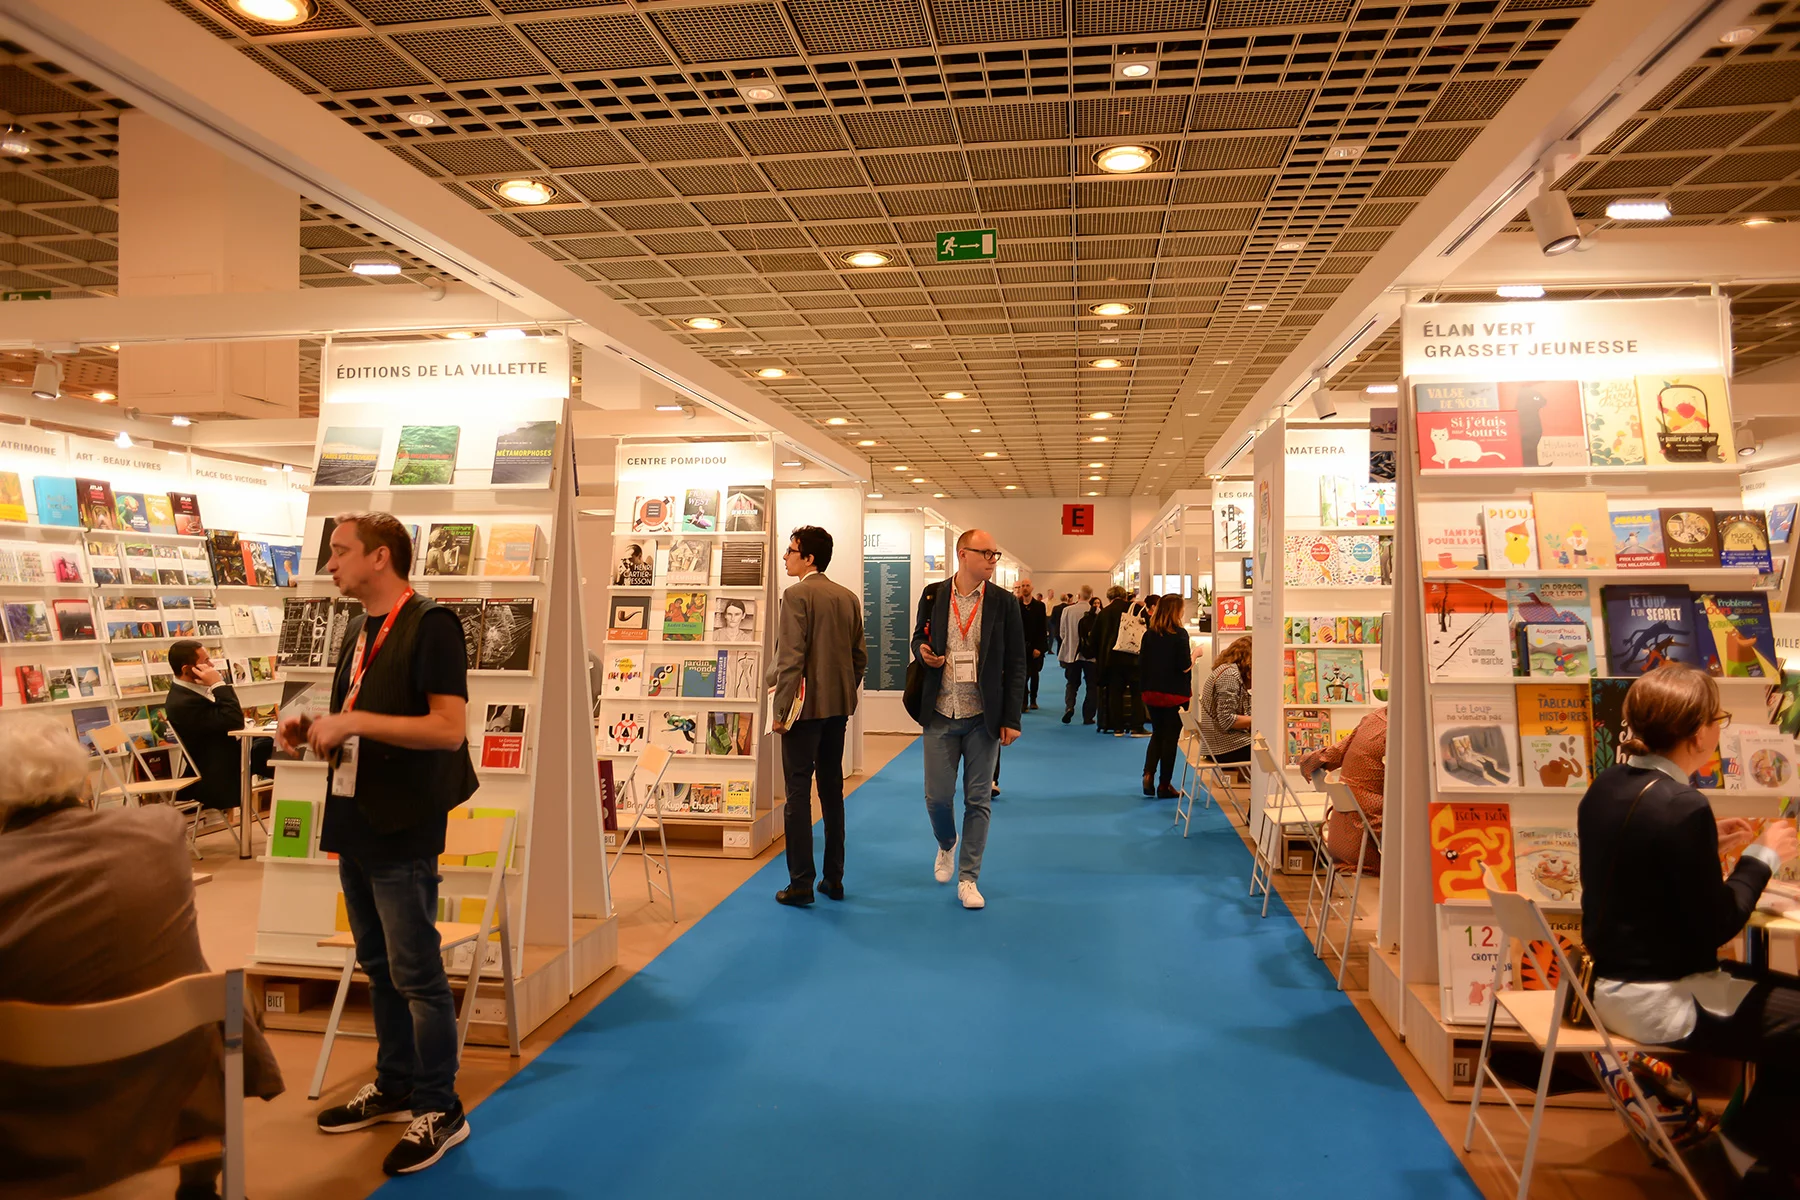 A man walks between displays of books at Frankfurt book fair. People on either side are talking to each other or looking at displays.